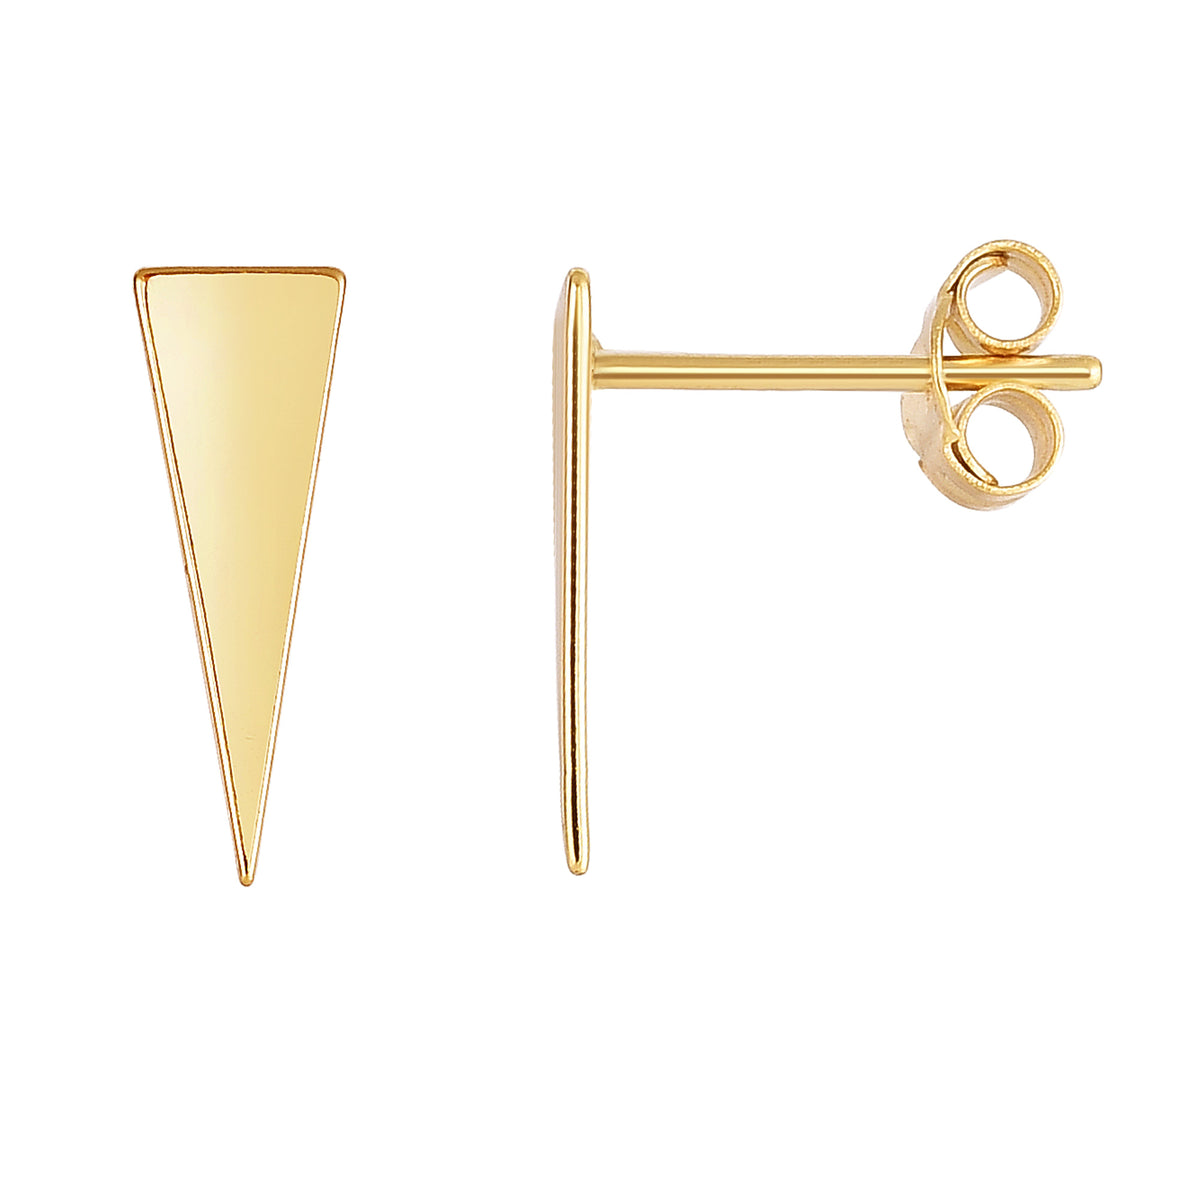 14K Yellow Gold Long Triangle Climber Stud Earrings fine designer jewelry for men and women